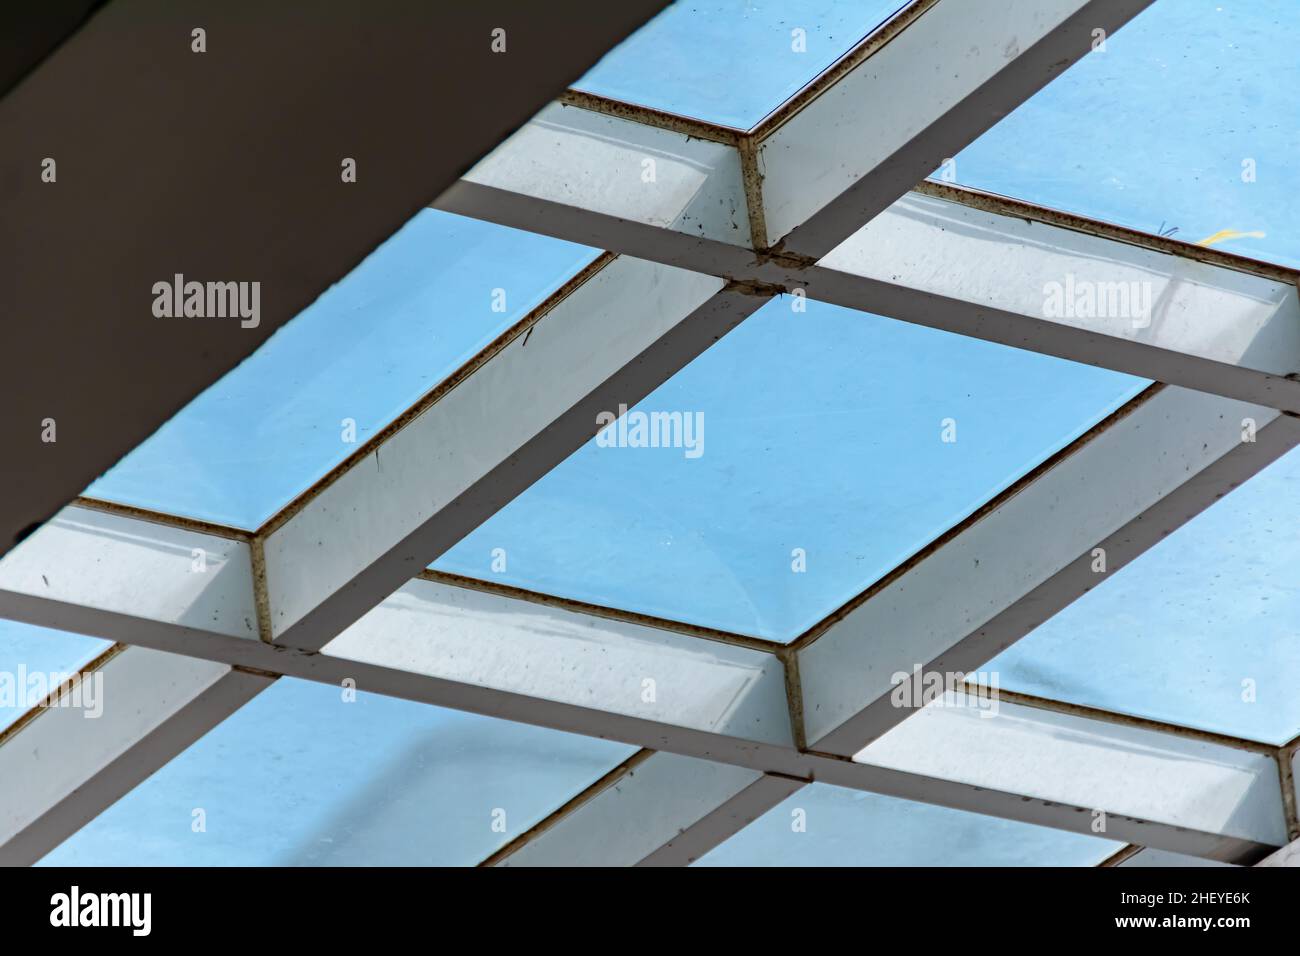 metal structure of white canopy with tempered glass covering upside under the clear and bright blue sky Stock Photo